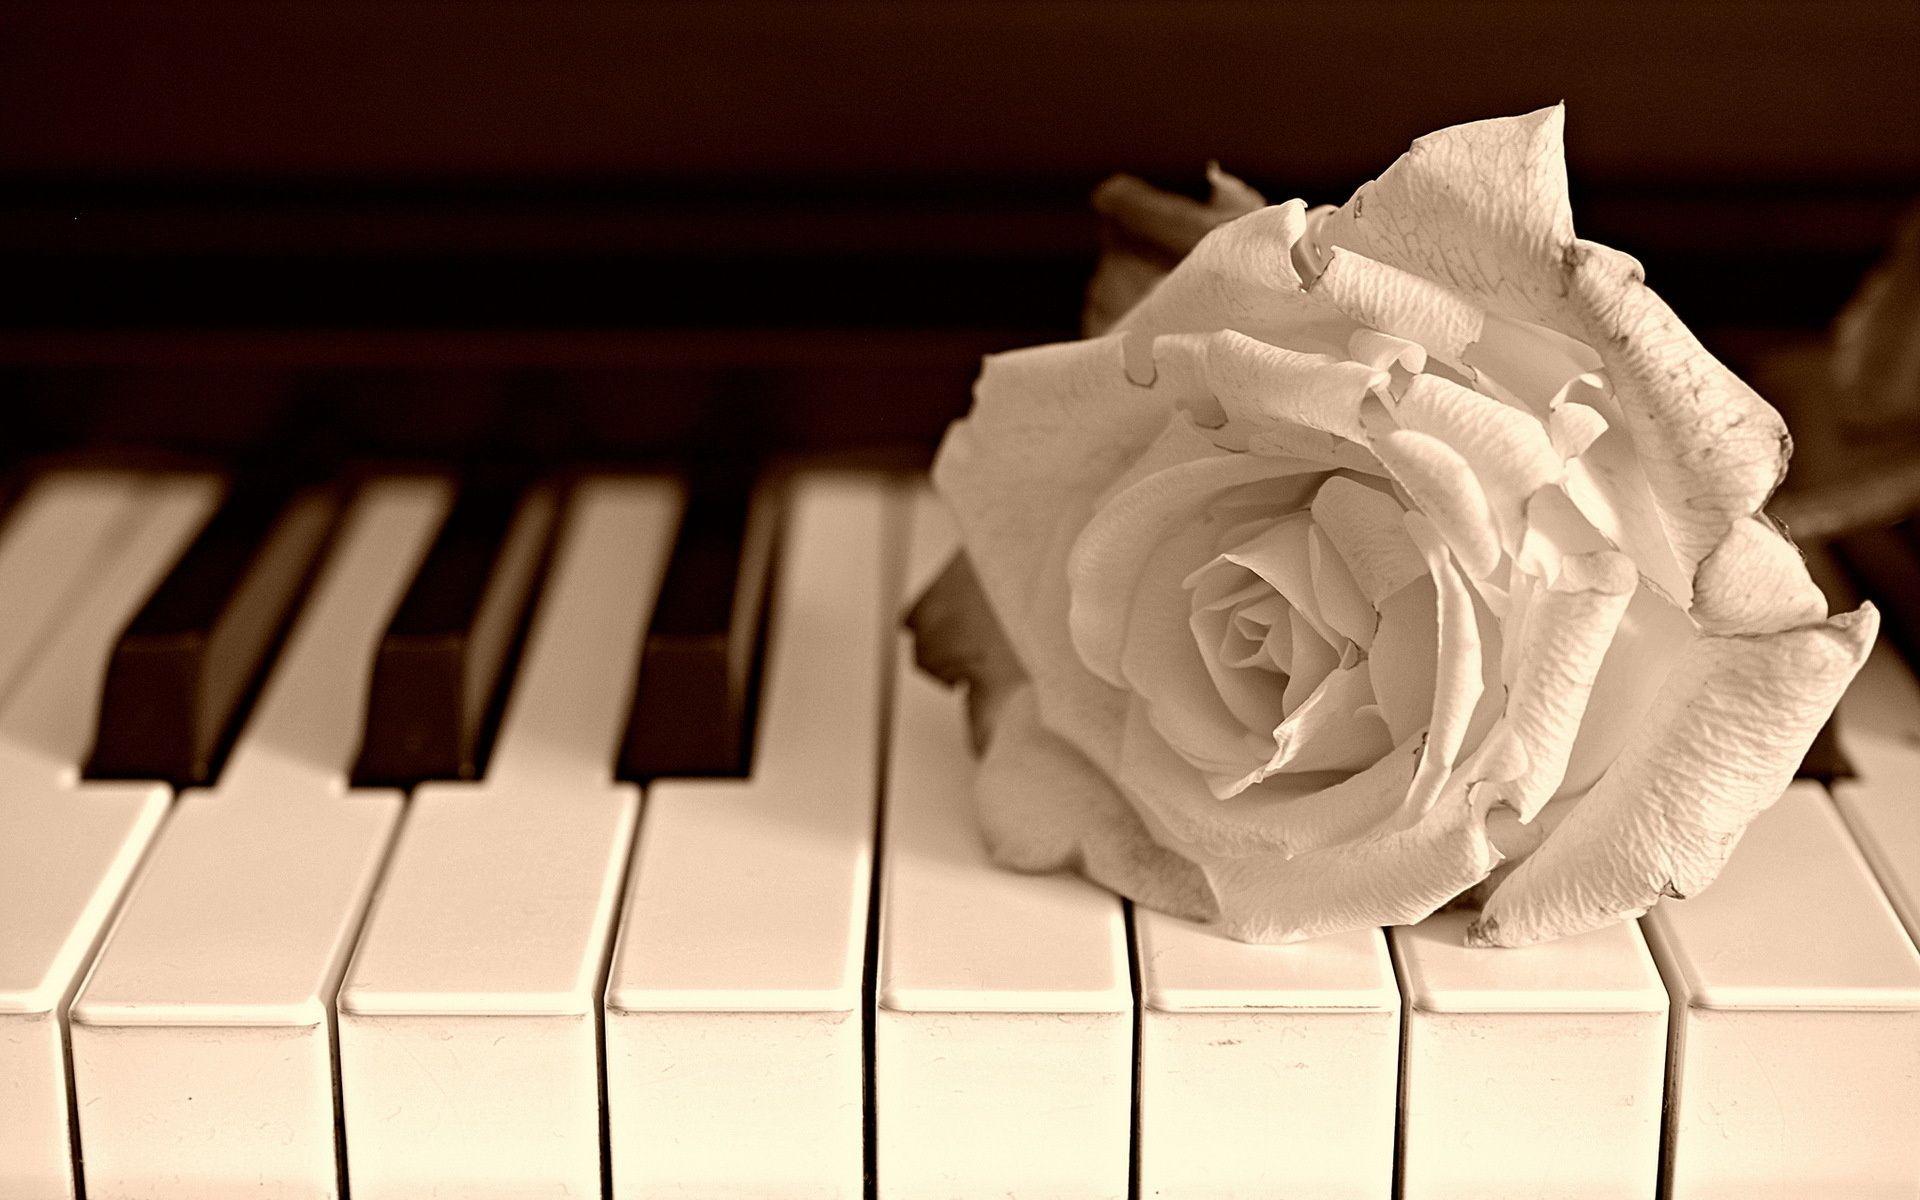 Piano Wallpaper, High Definition, High Quality, Widescreen